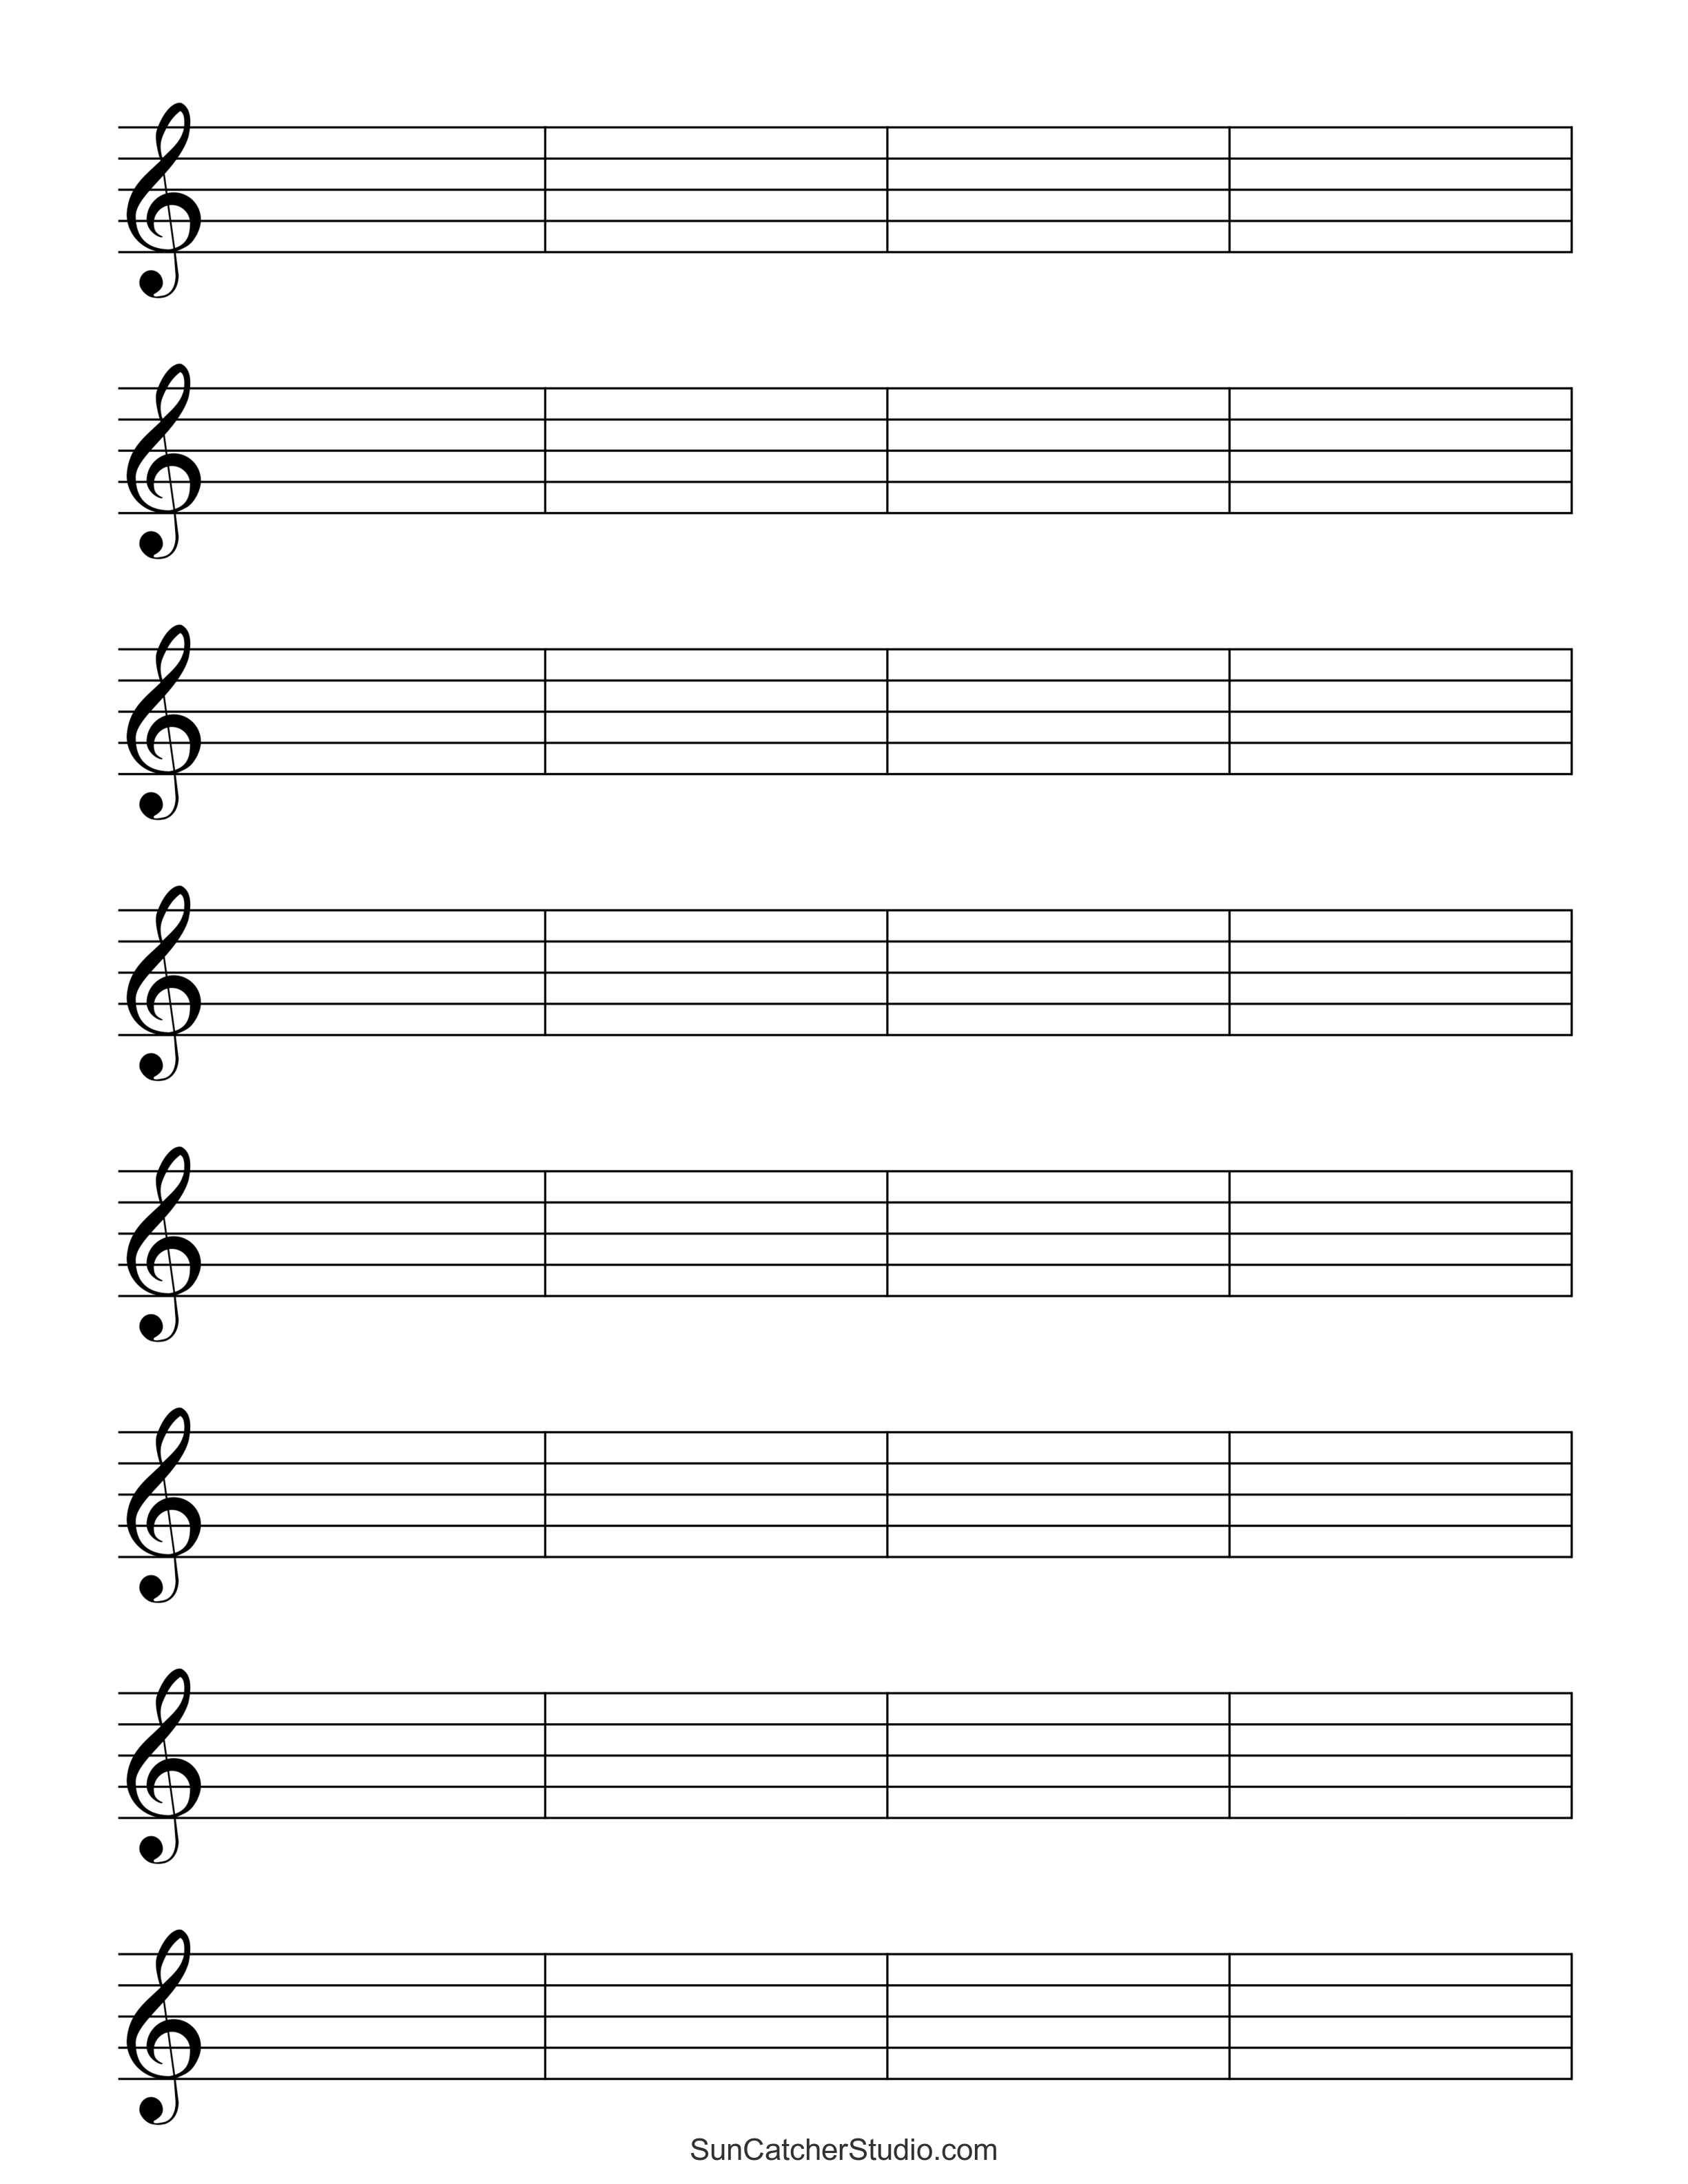 blank-sheet-music-free-printable-staff-paper-diy-projects-patterns-monograms-designs